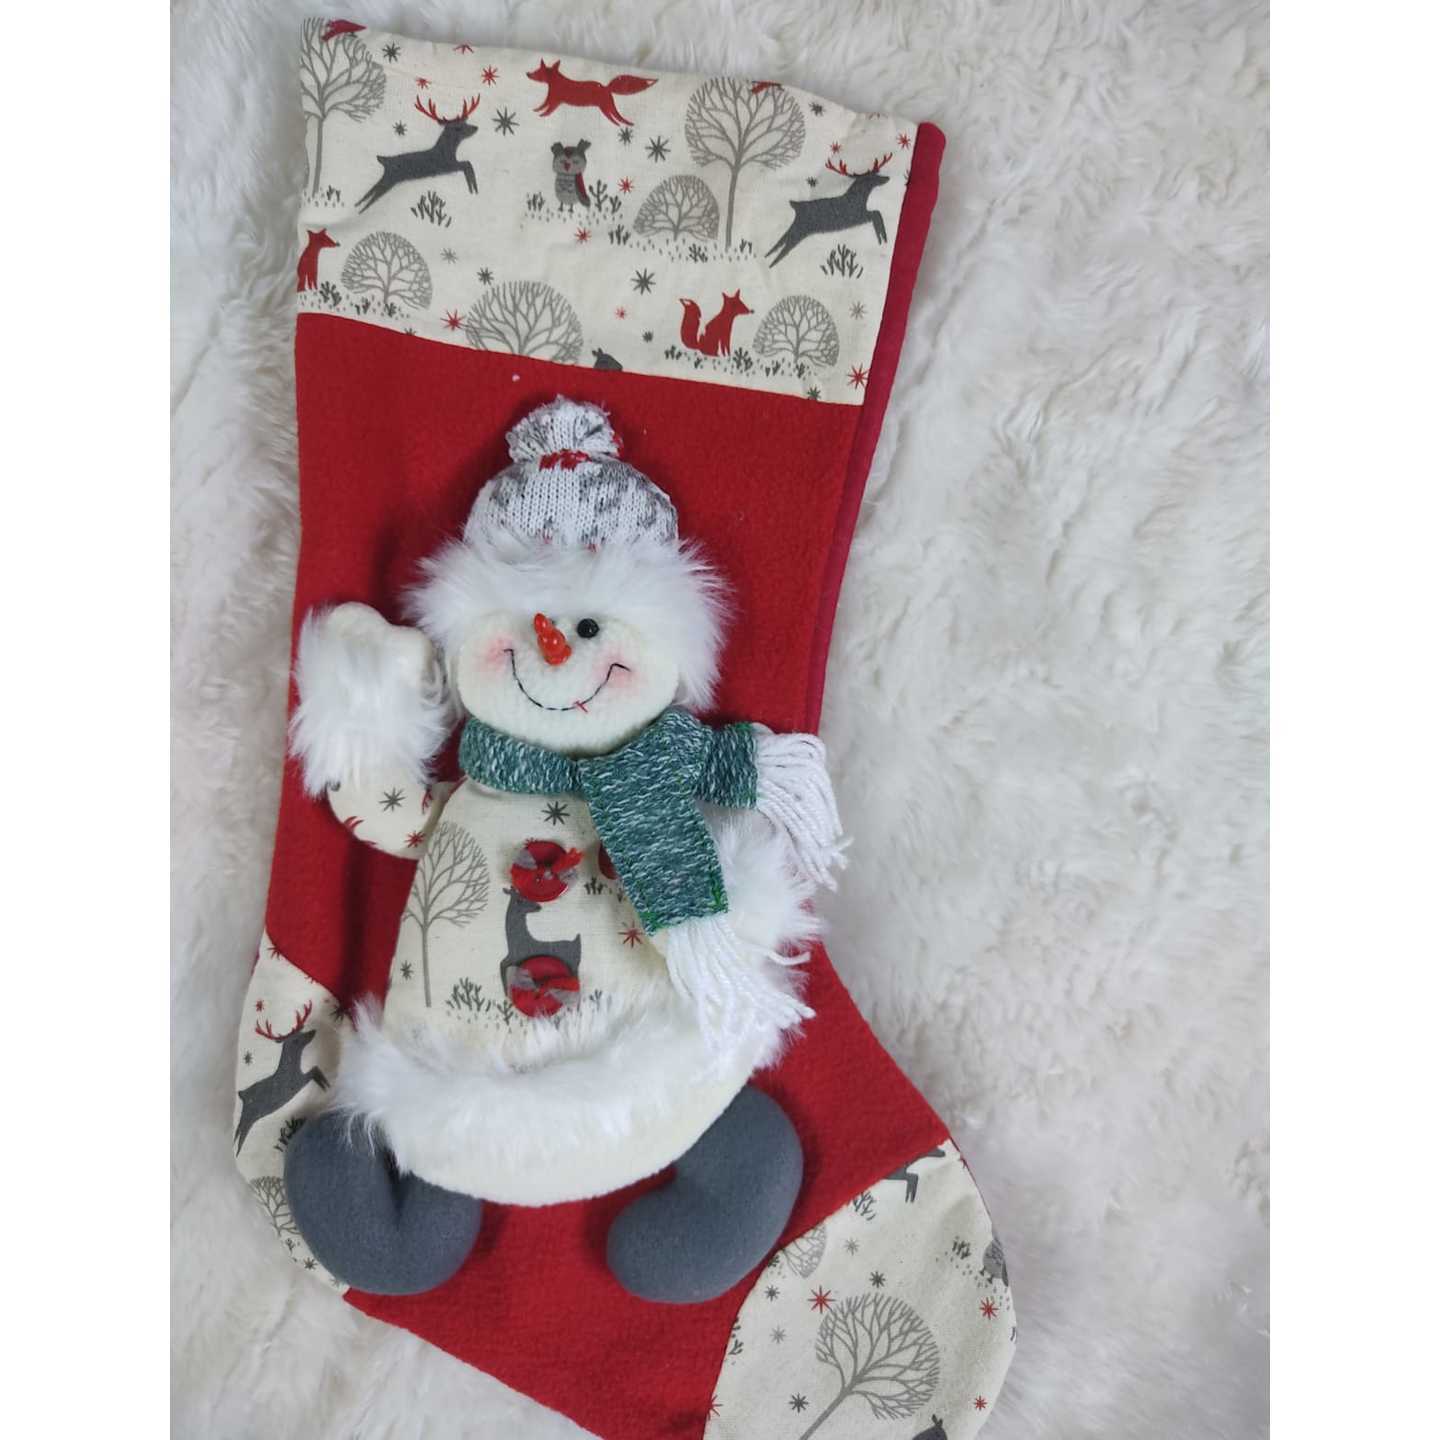 Personalised Stockings - Furry Snowman